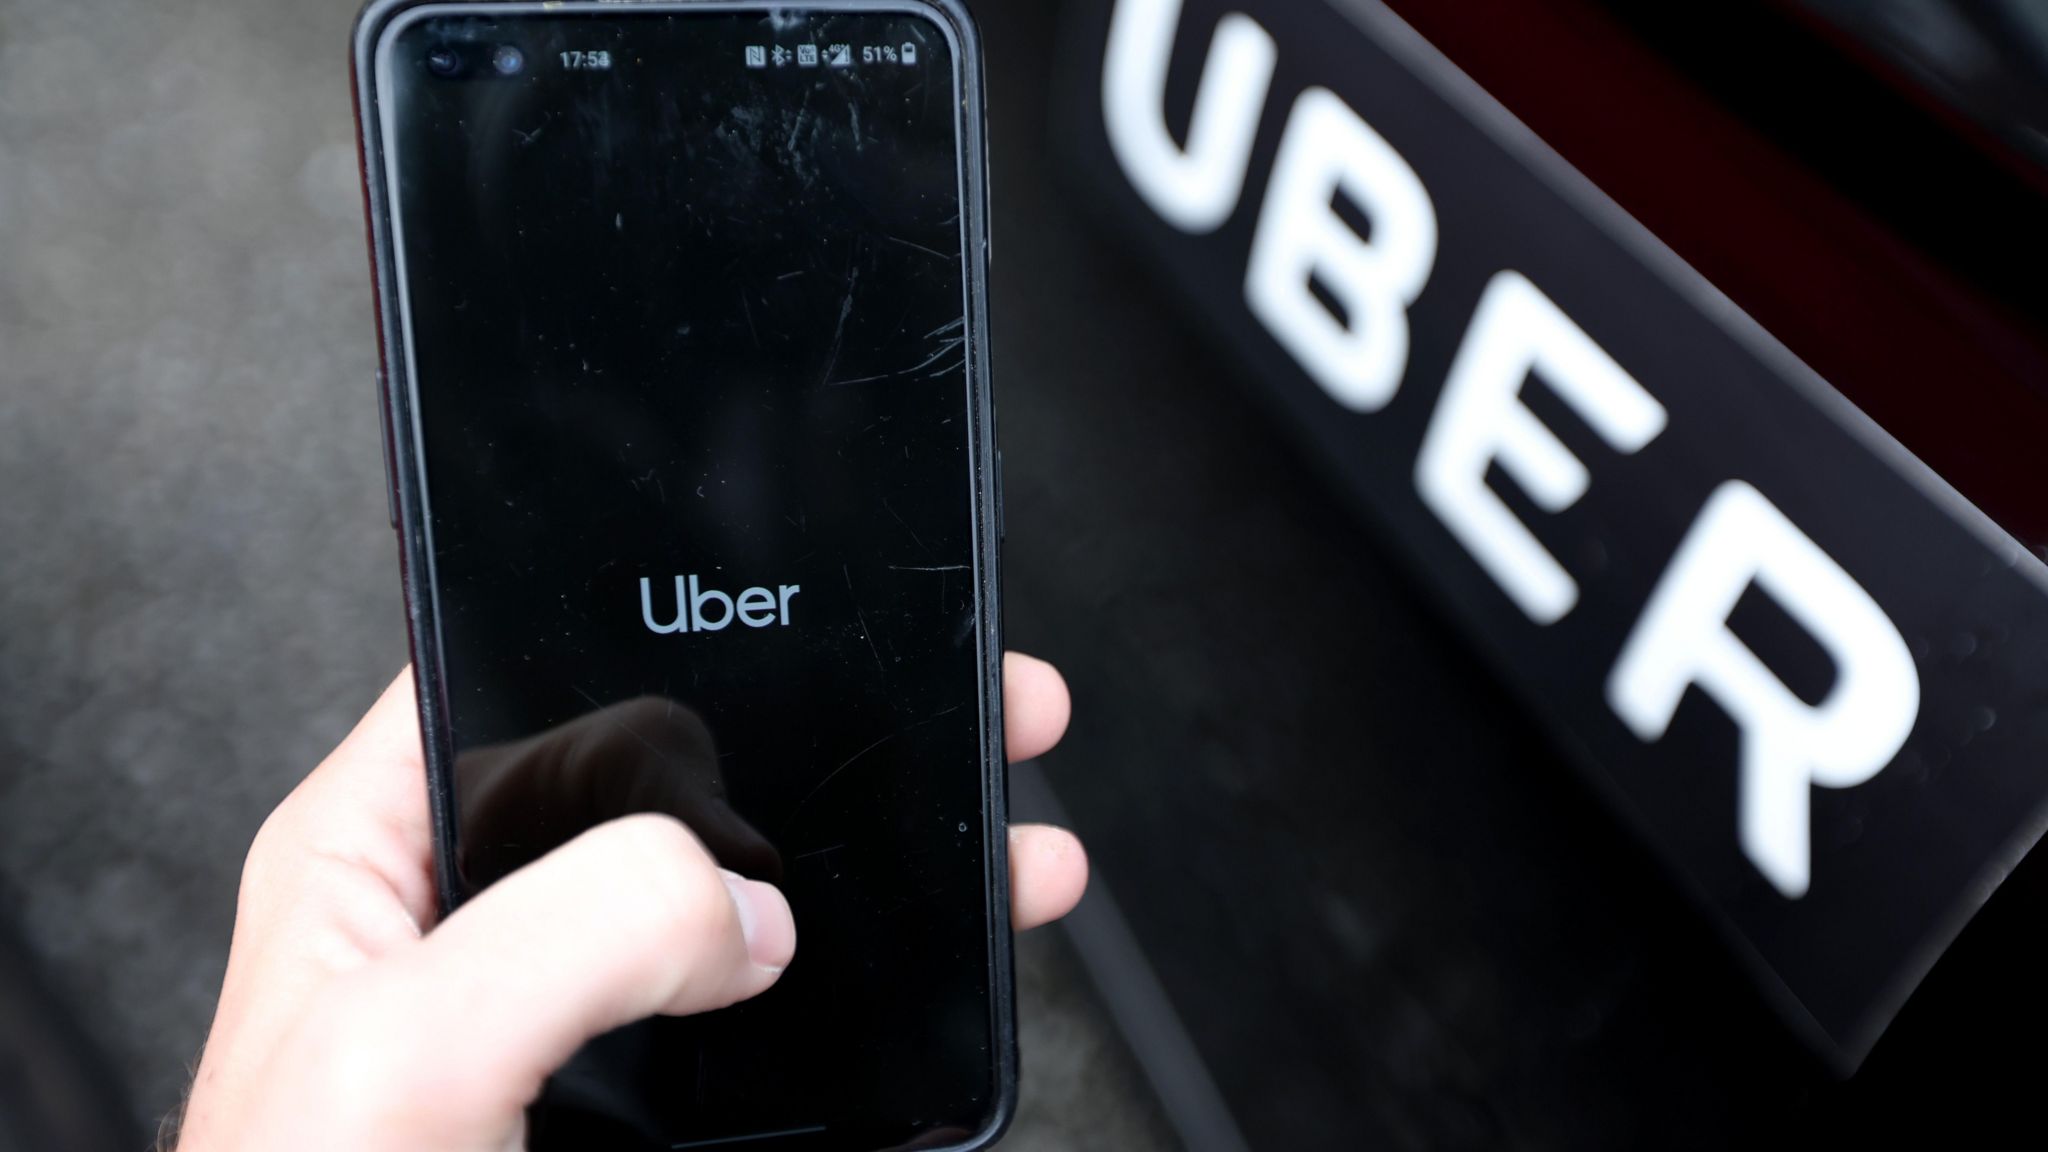 Uber app on a phone next to an Uber branded car